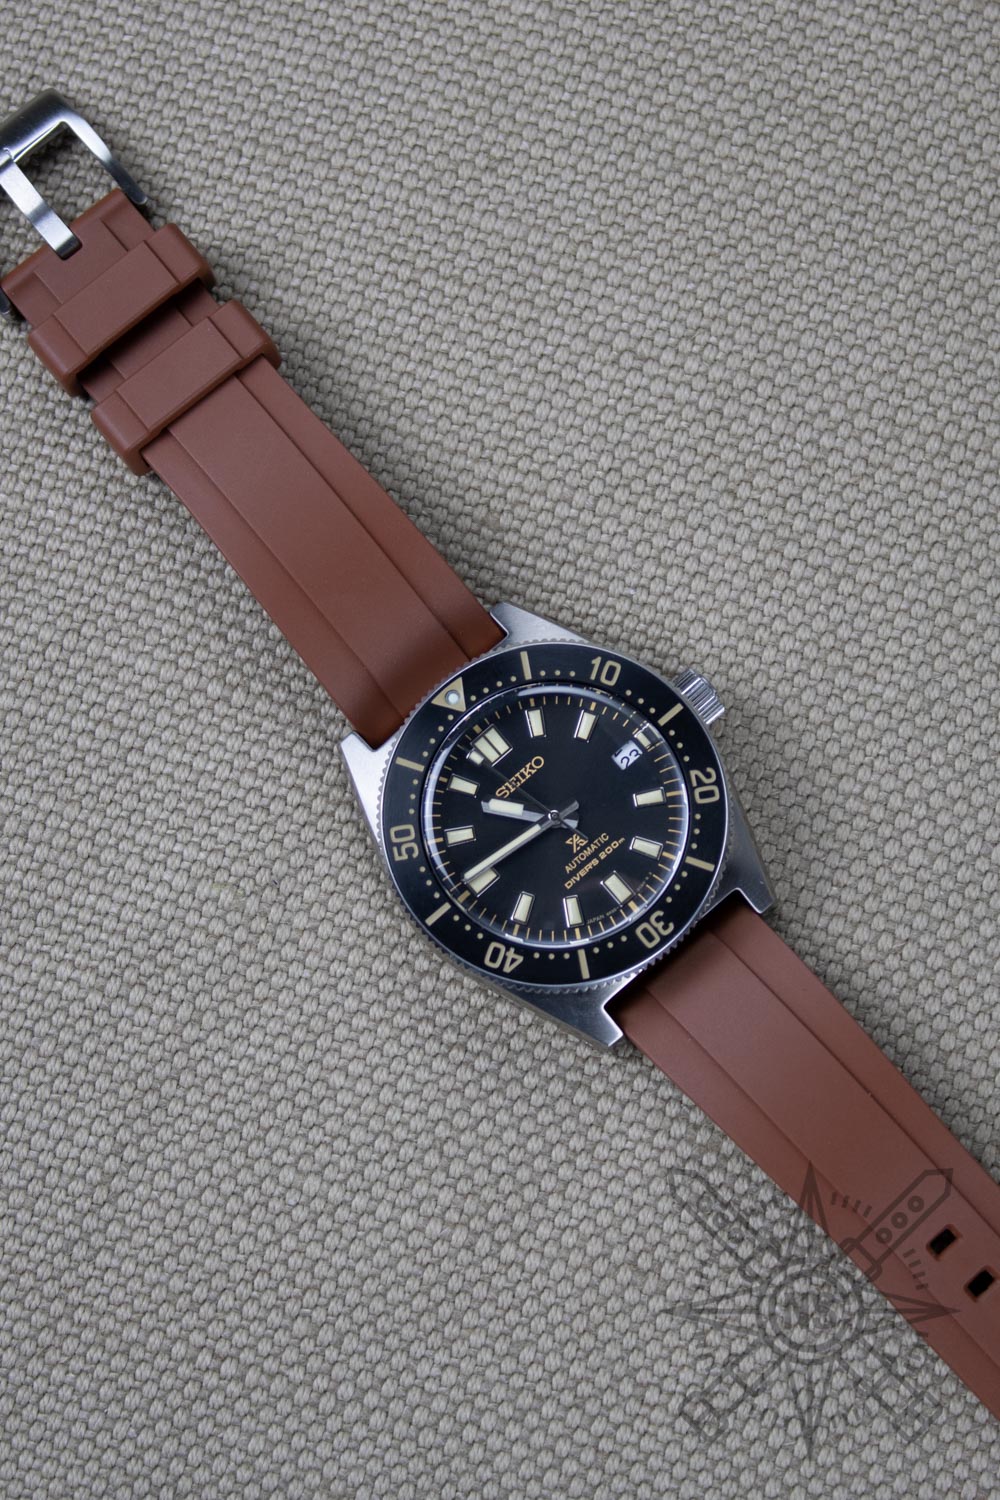 Seiko SPB on a brown rubber watch band